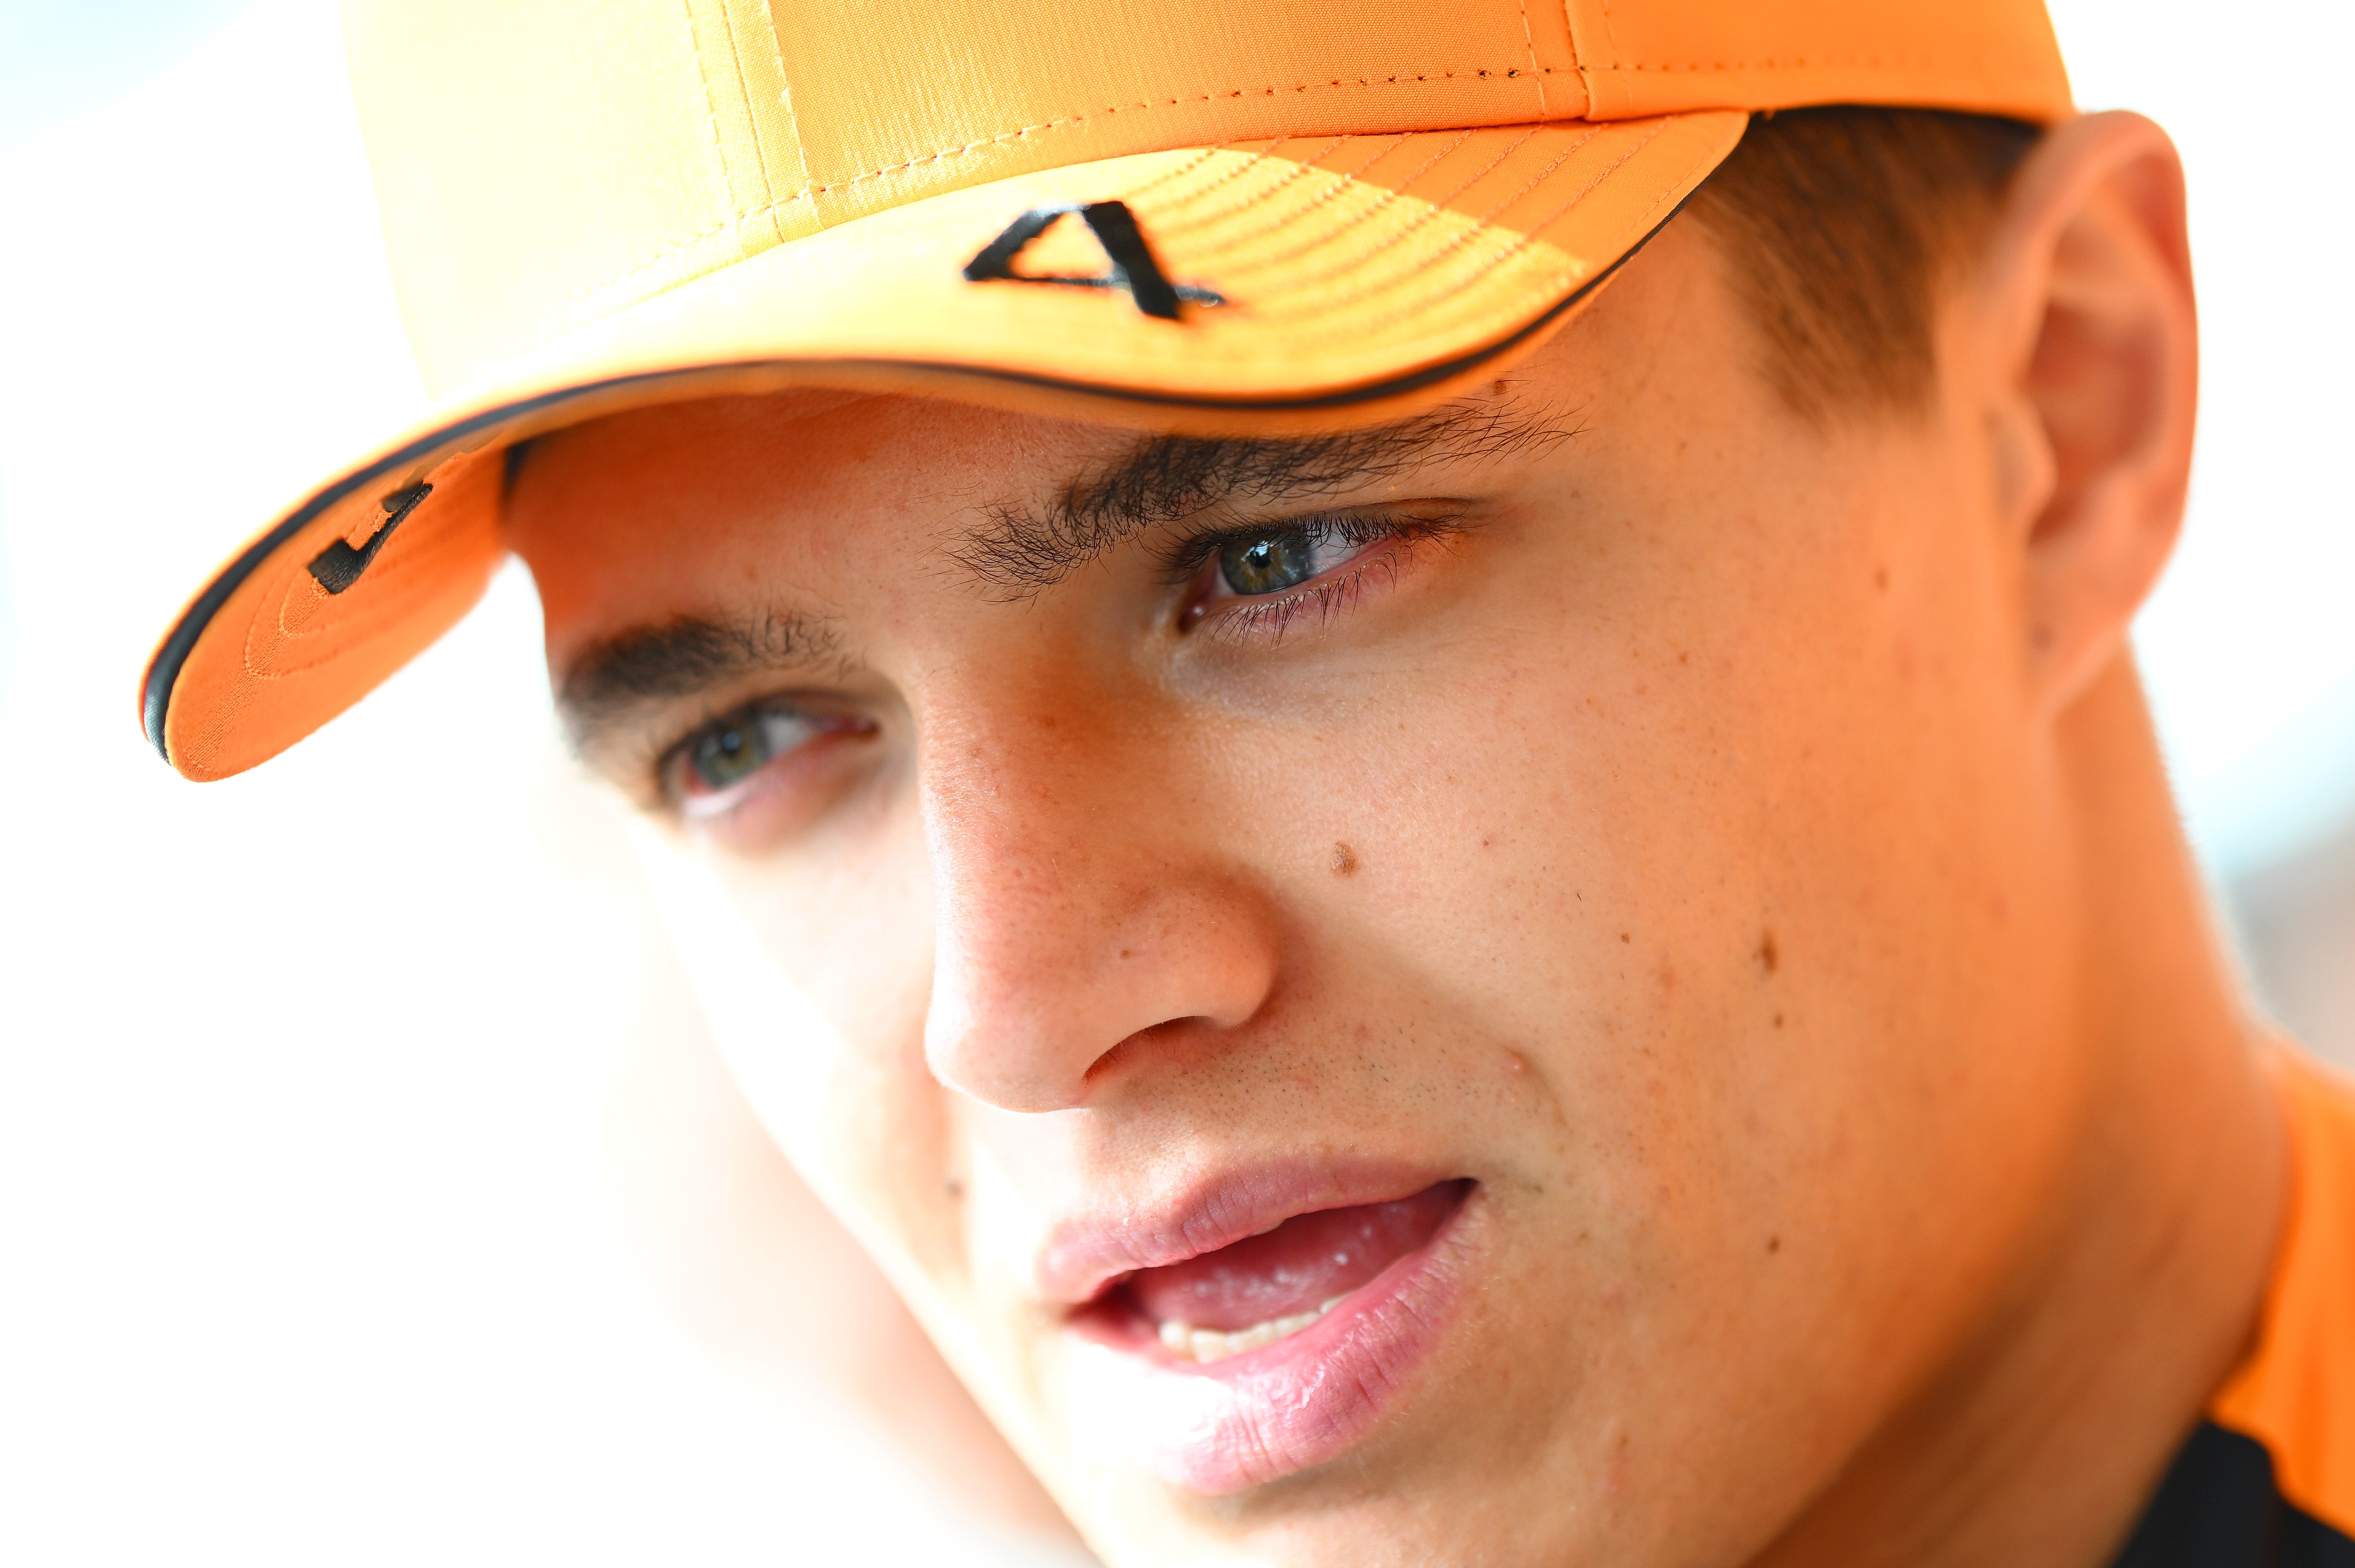 Lando Norris finished fifth in Japan having started the race in third